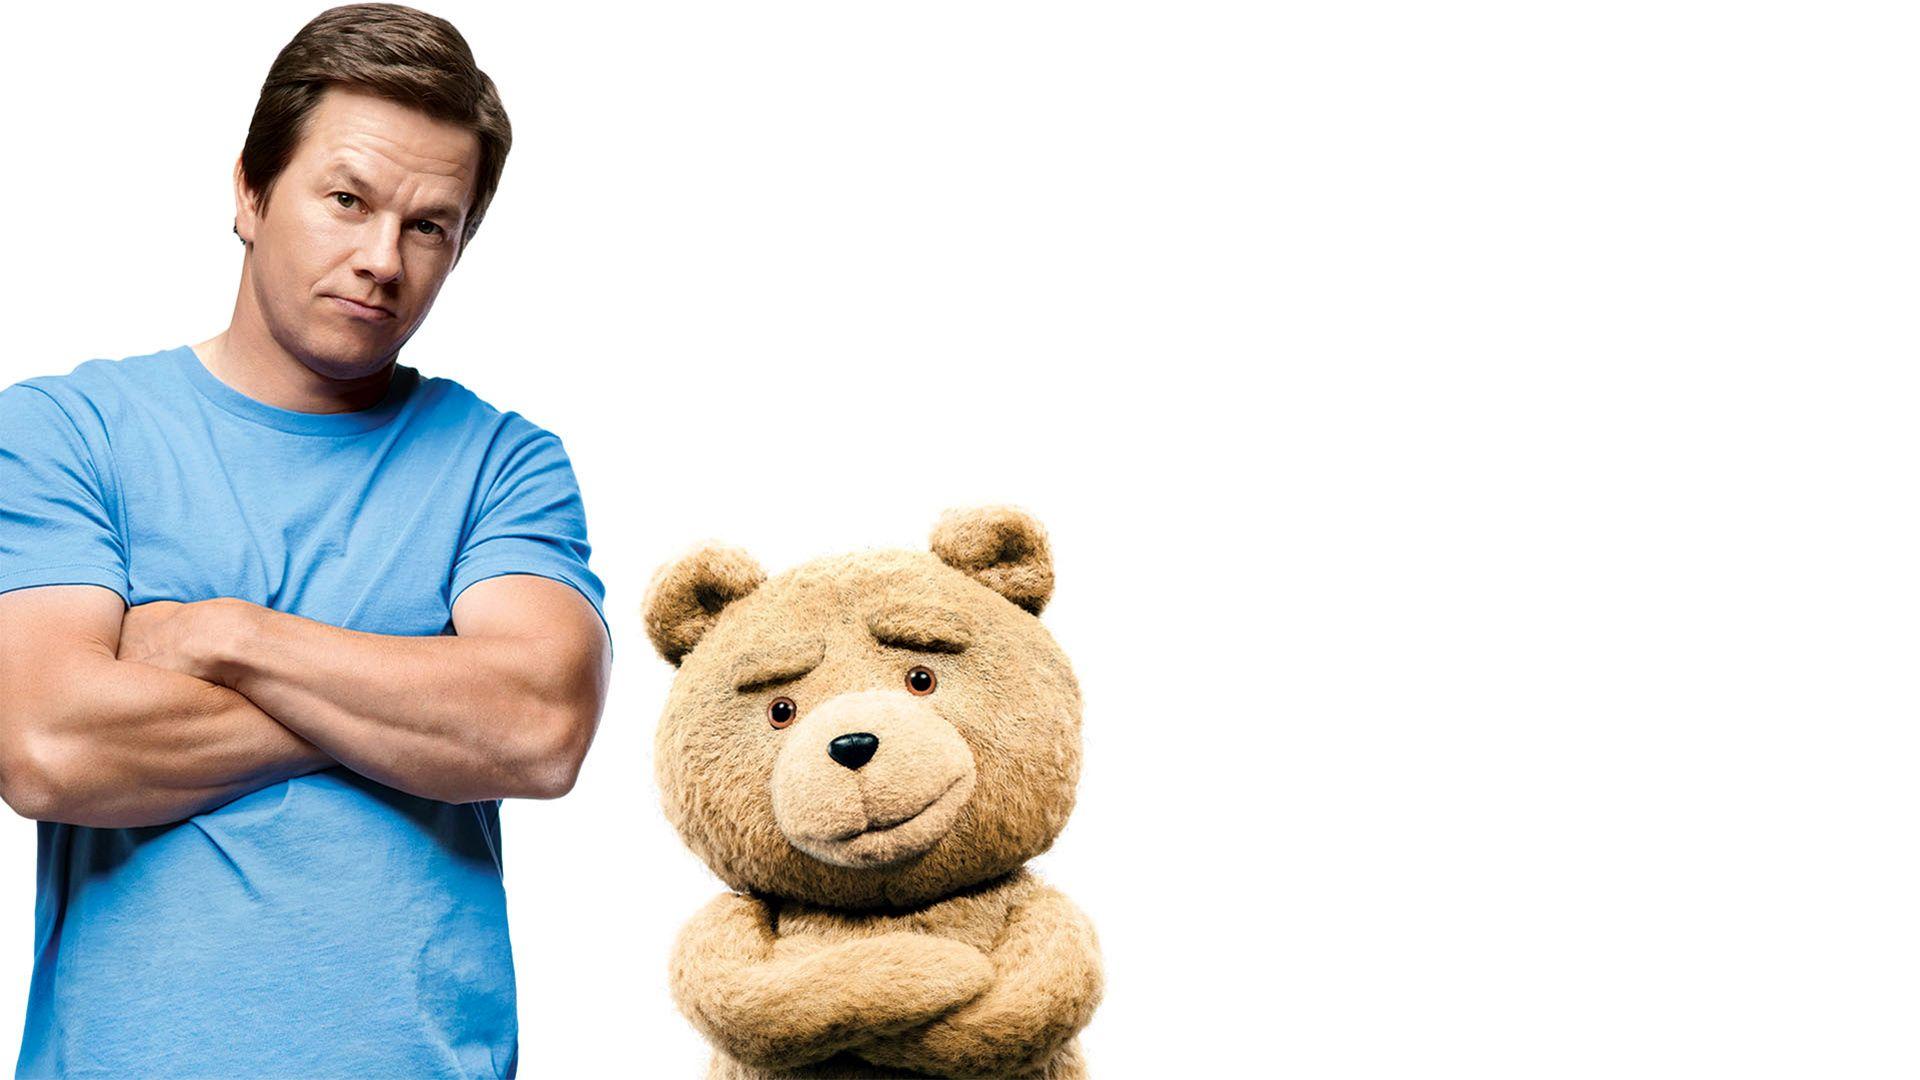 Executive Ted 4K wallpaper download